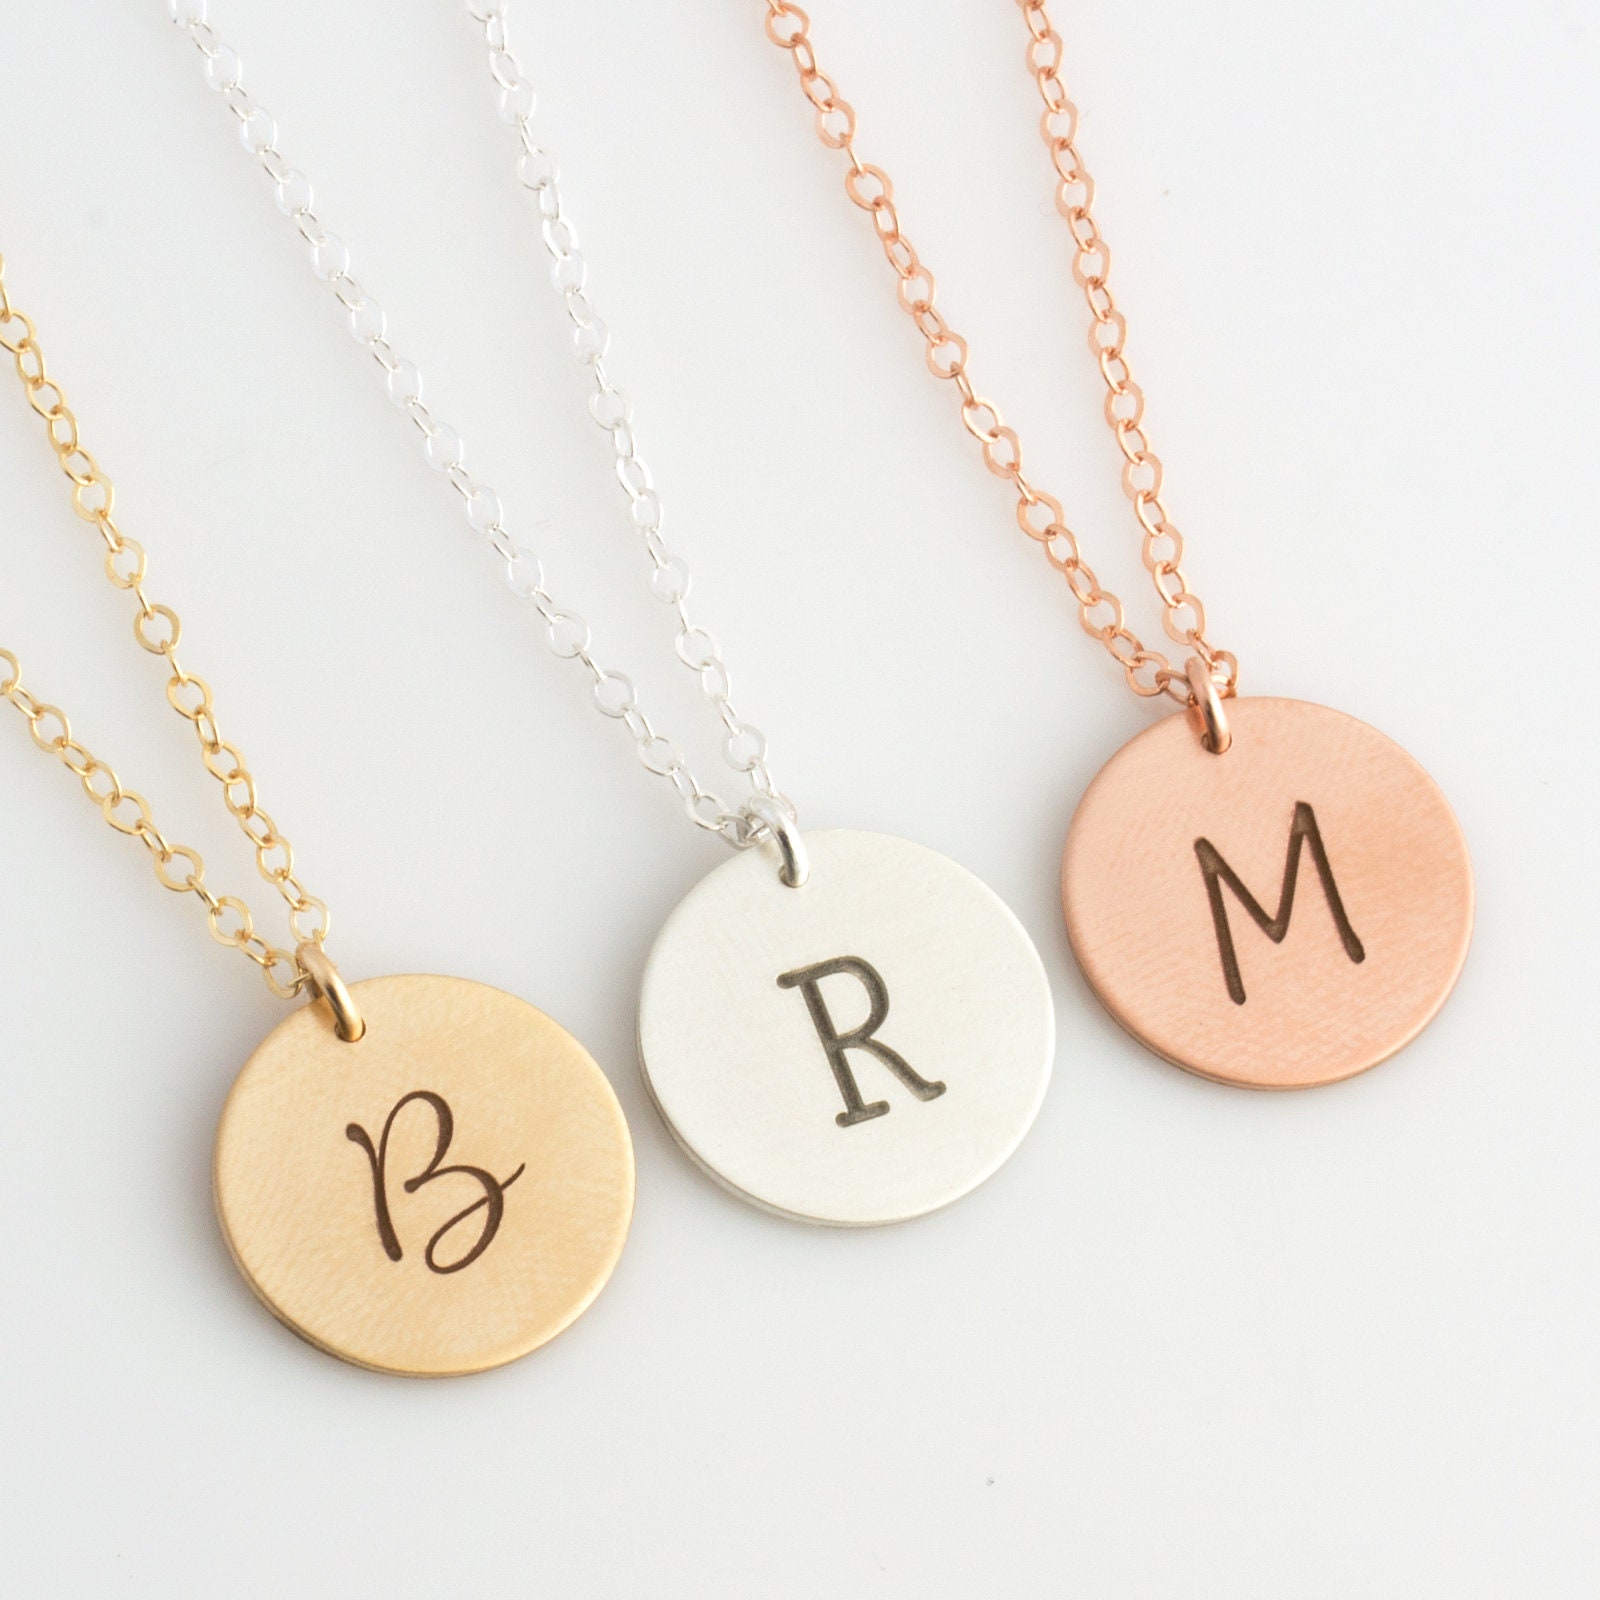 Dainty Engraved Disc Necklace, Personalized Disc Necklace, Engraved Monogram Necklace, 14K Gold Fill, Mothers Day Gift, LEILAJewelryShop